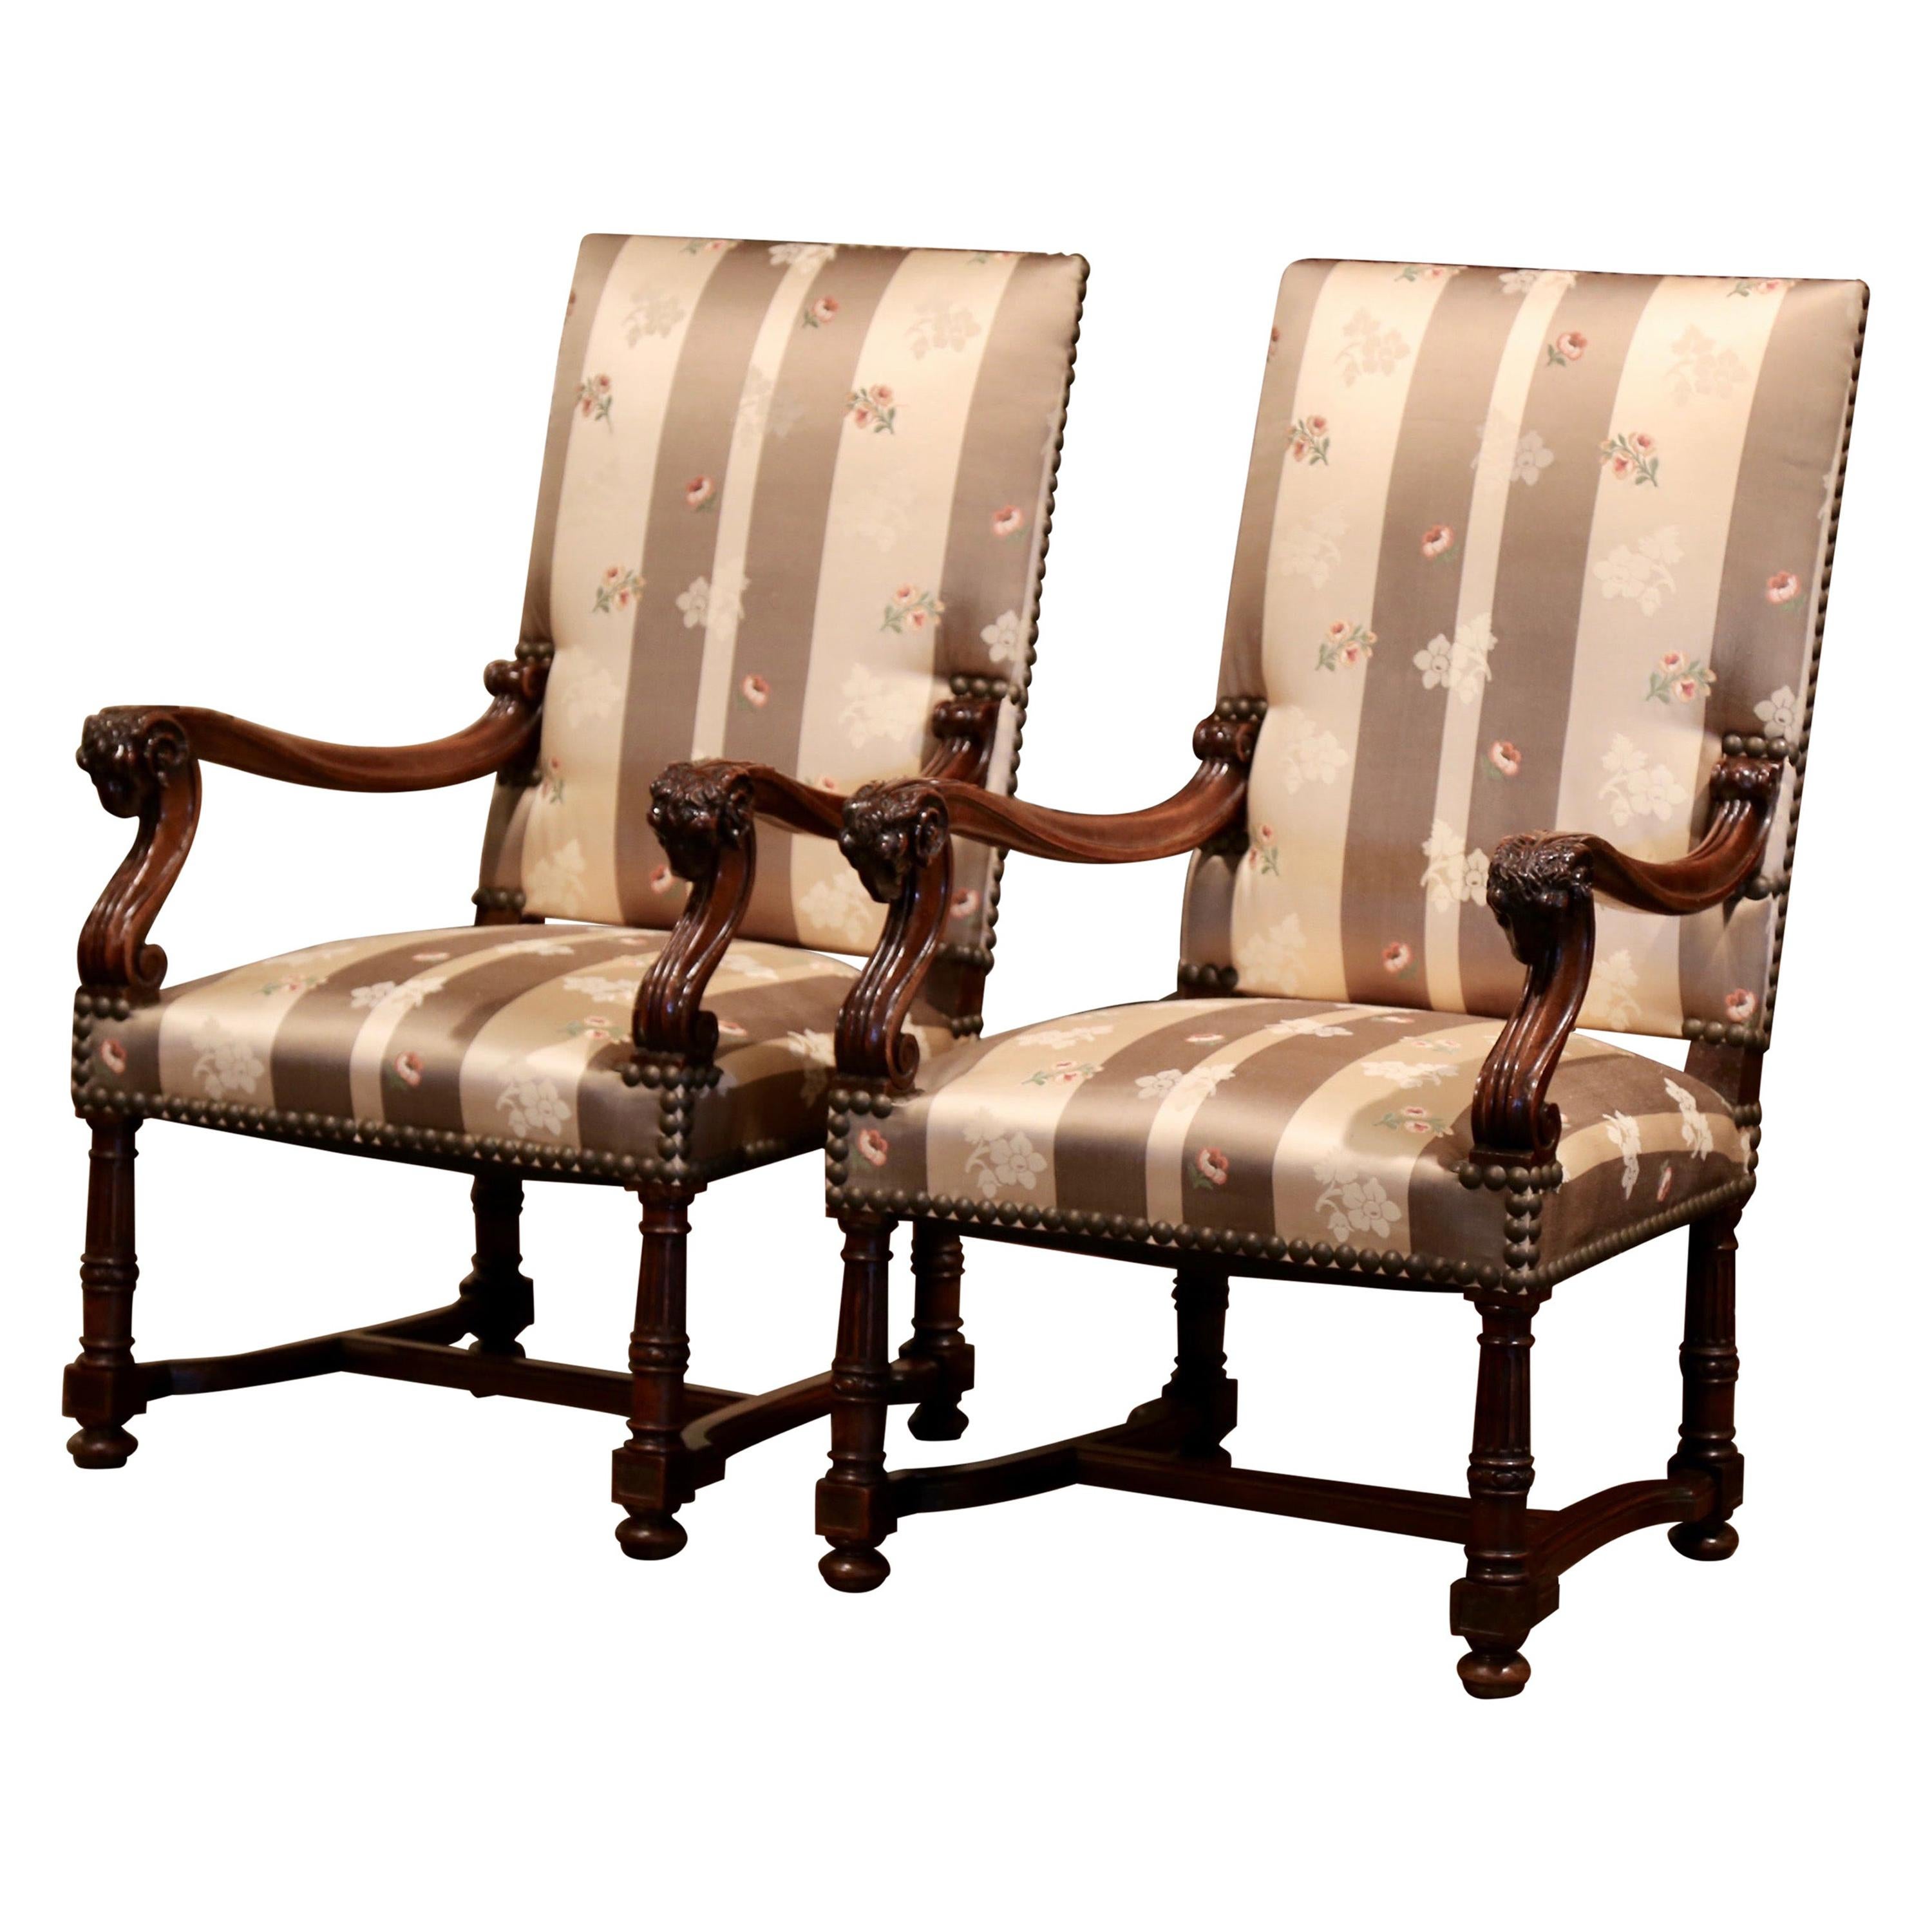 Pair of 19th Century French Louis XIII Carved Walnut Armchairs with Ram Decor For Sale